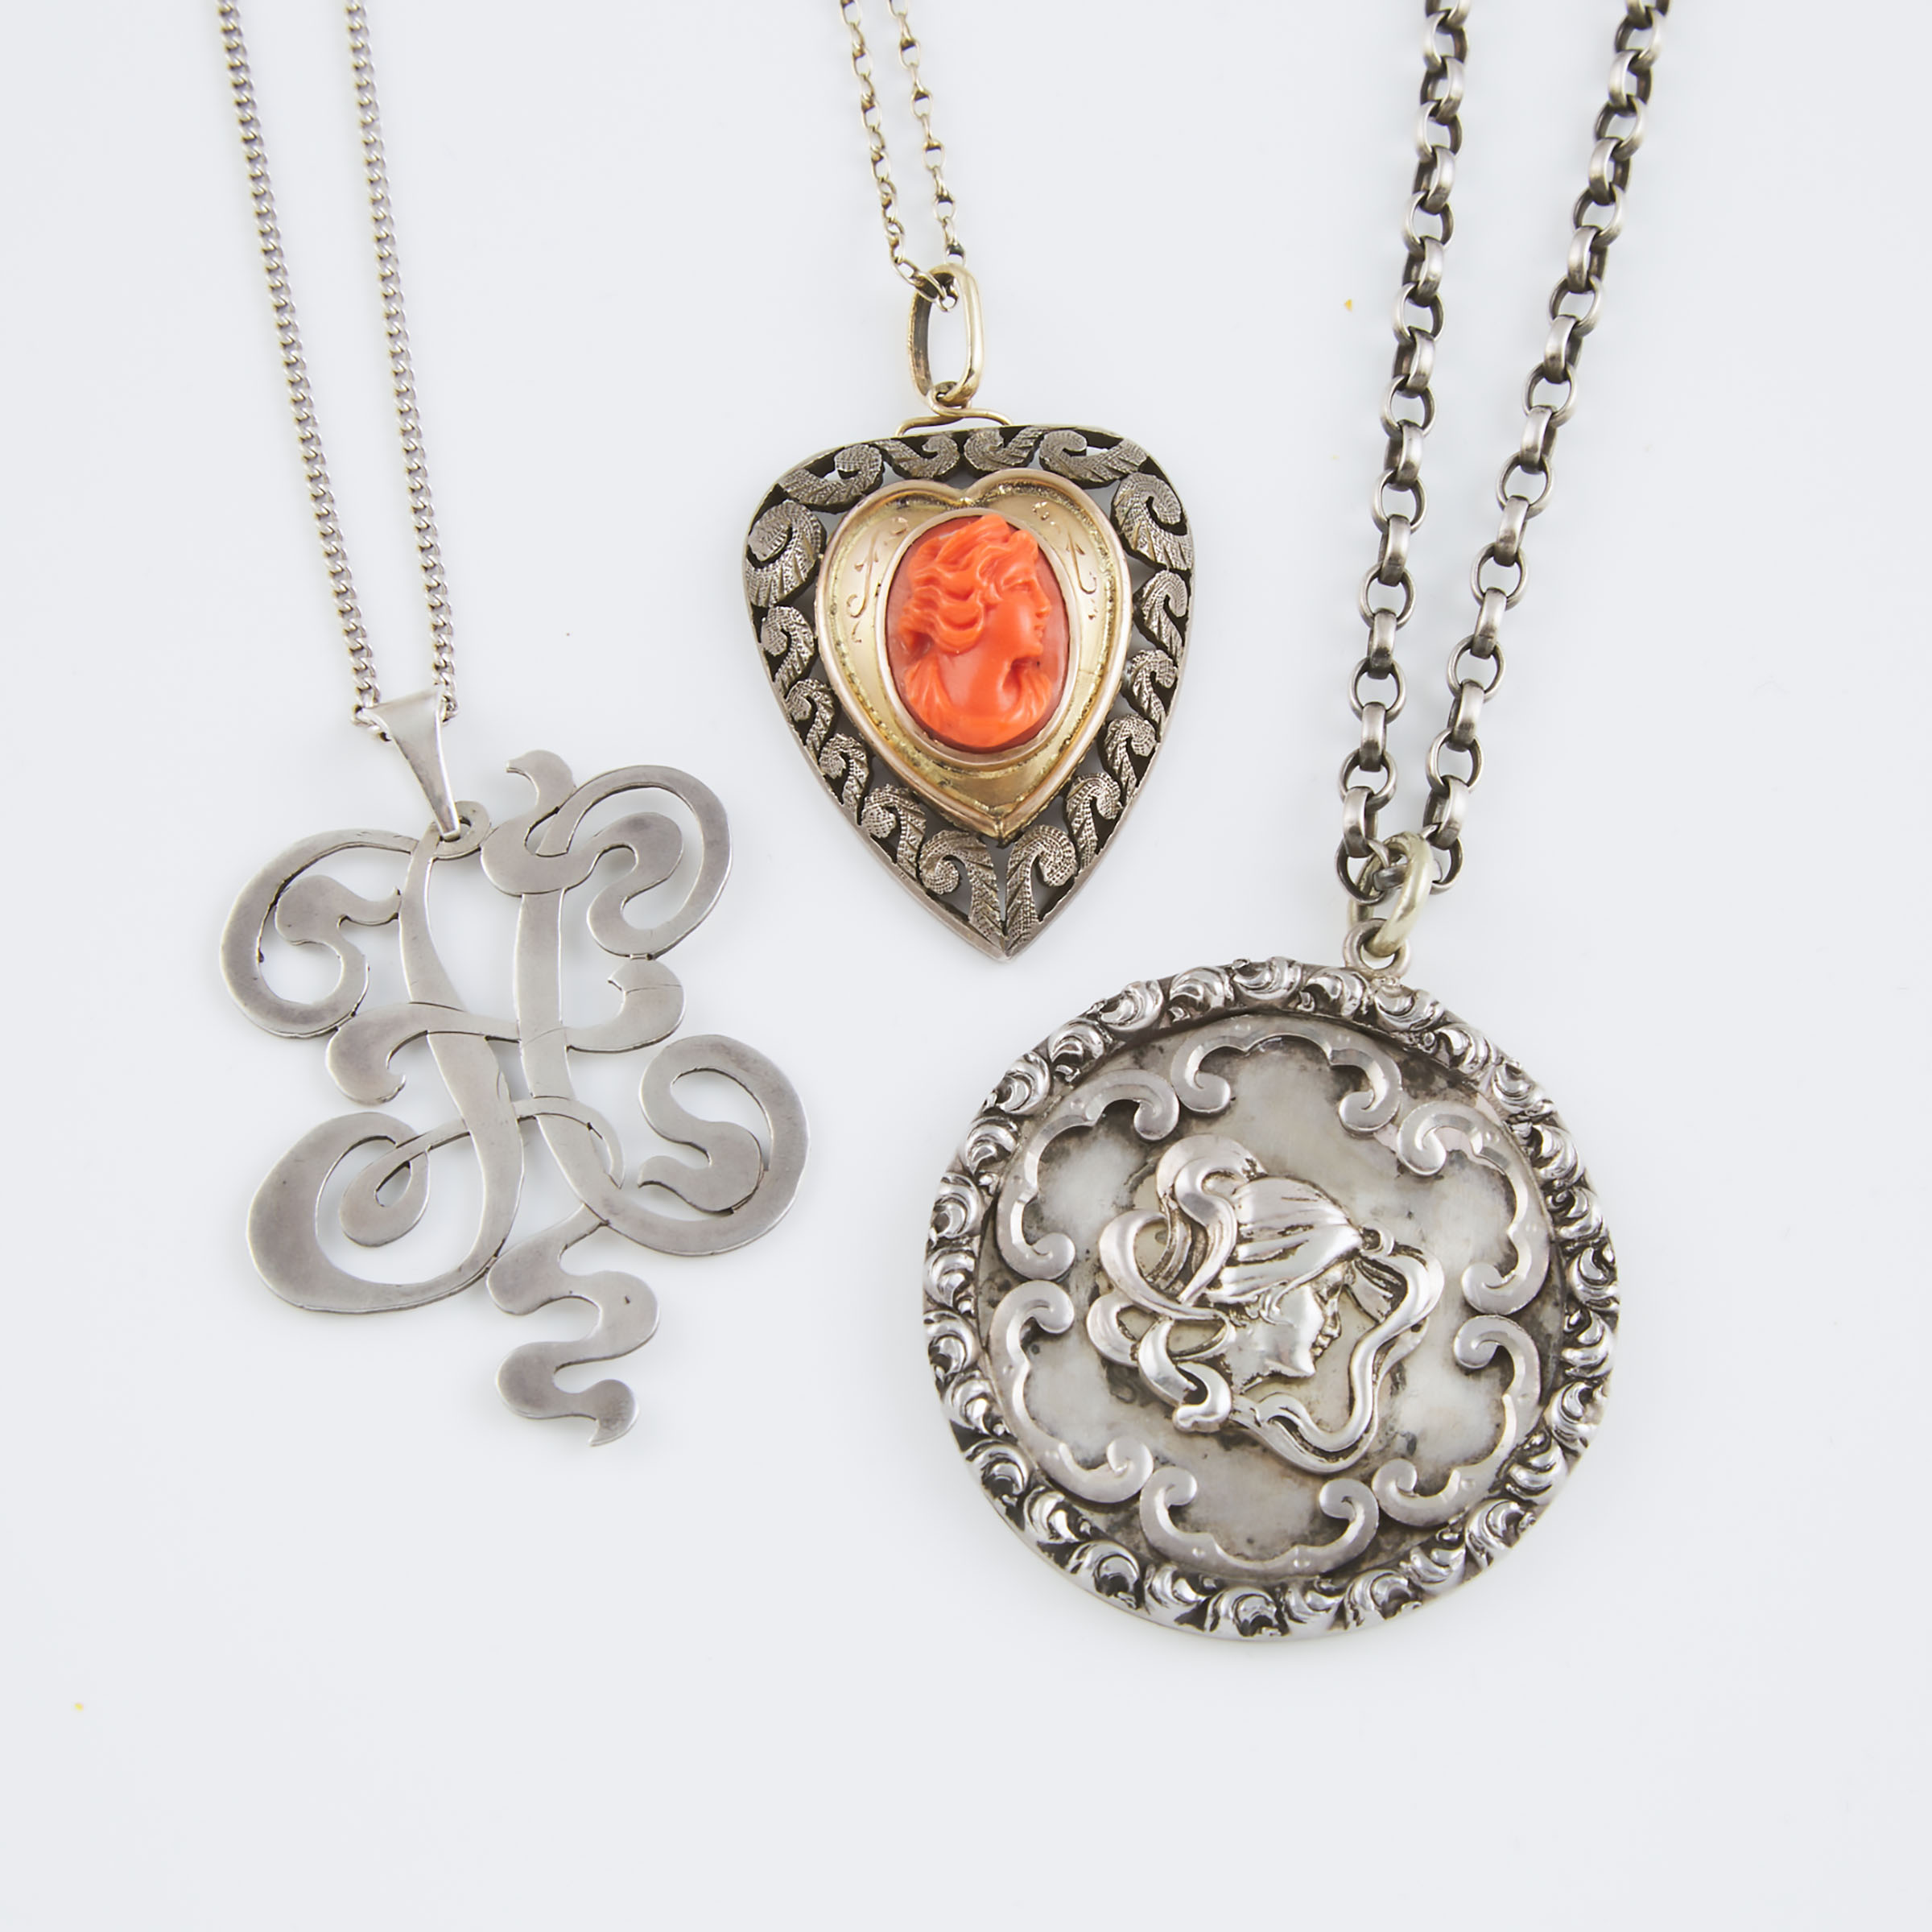 3 Various Pendants And Chains